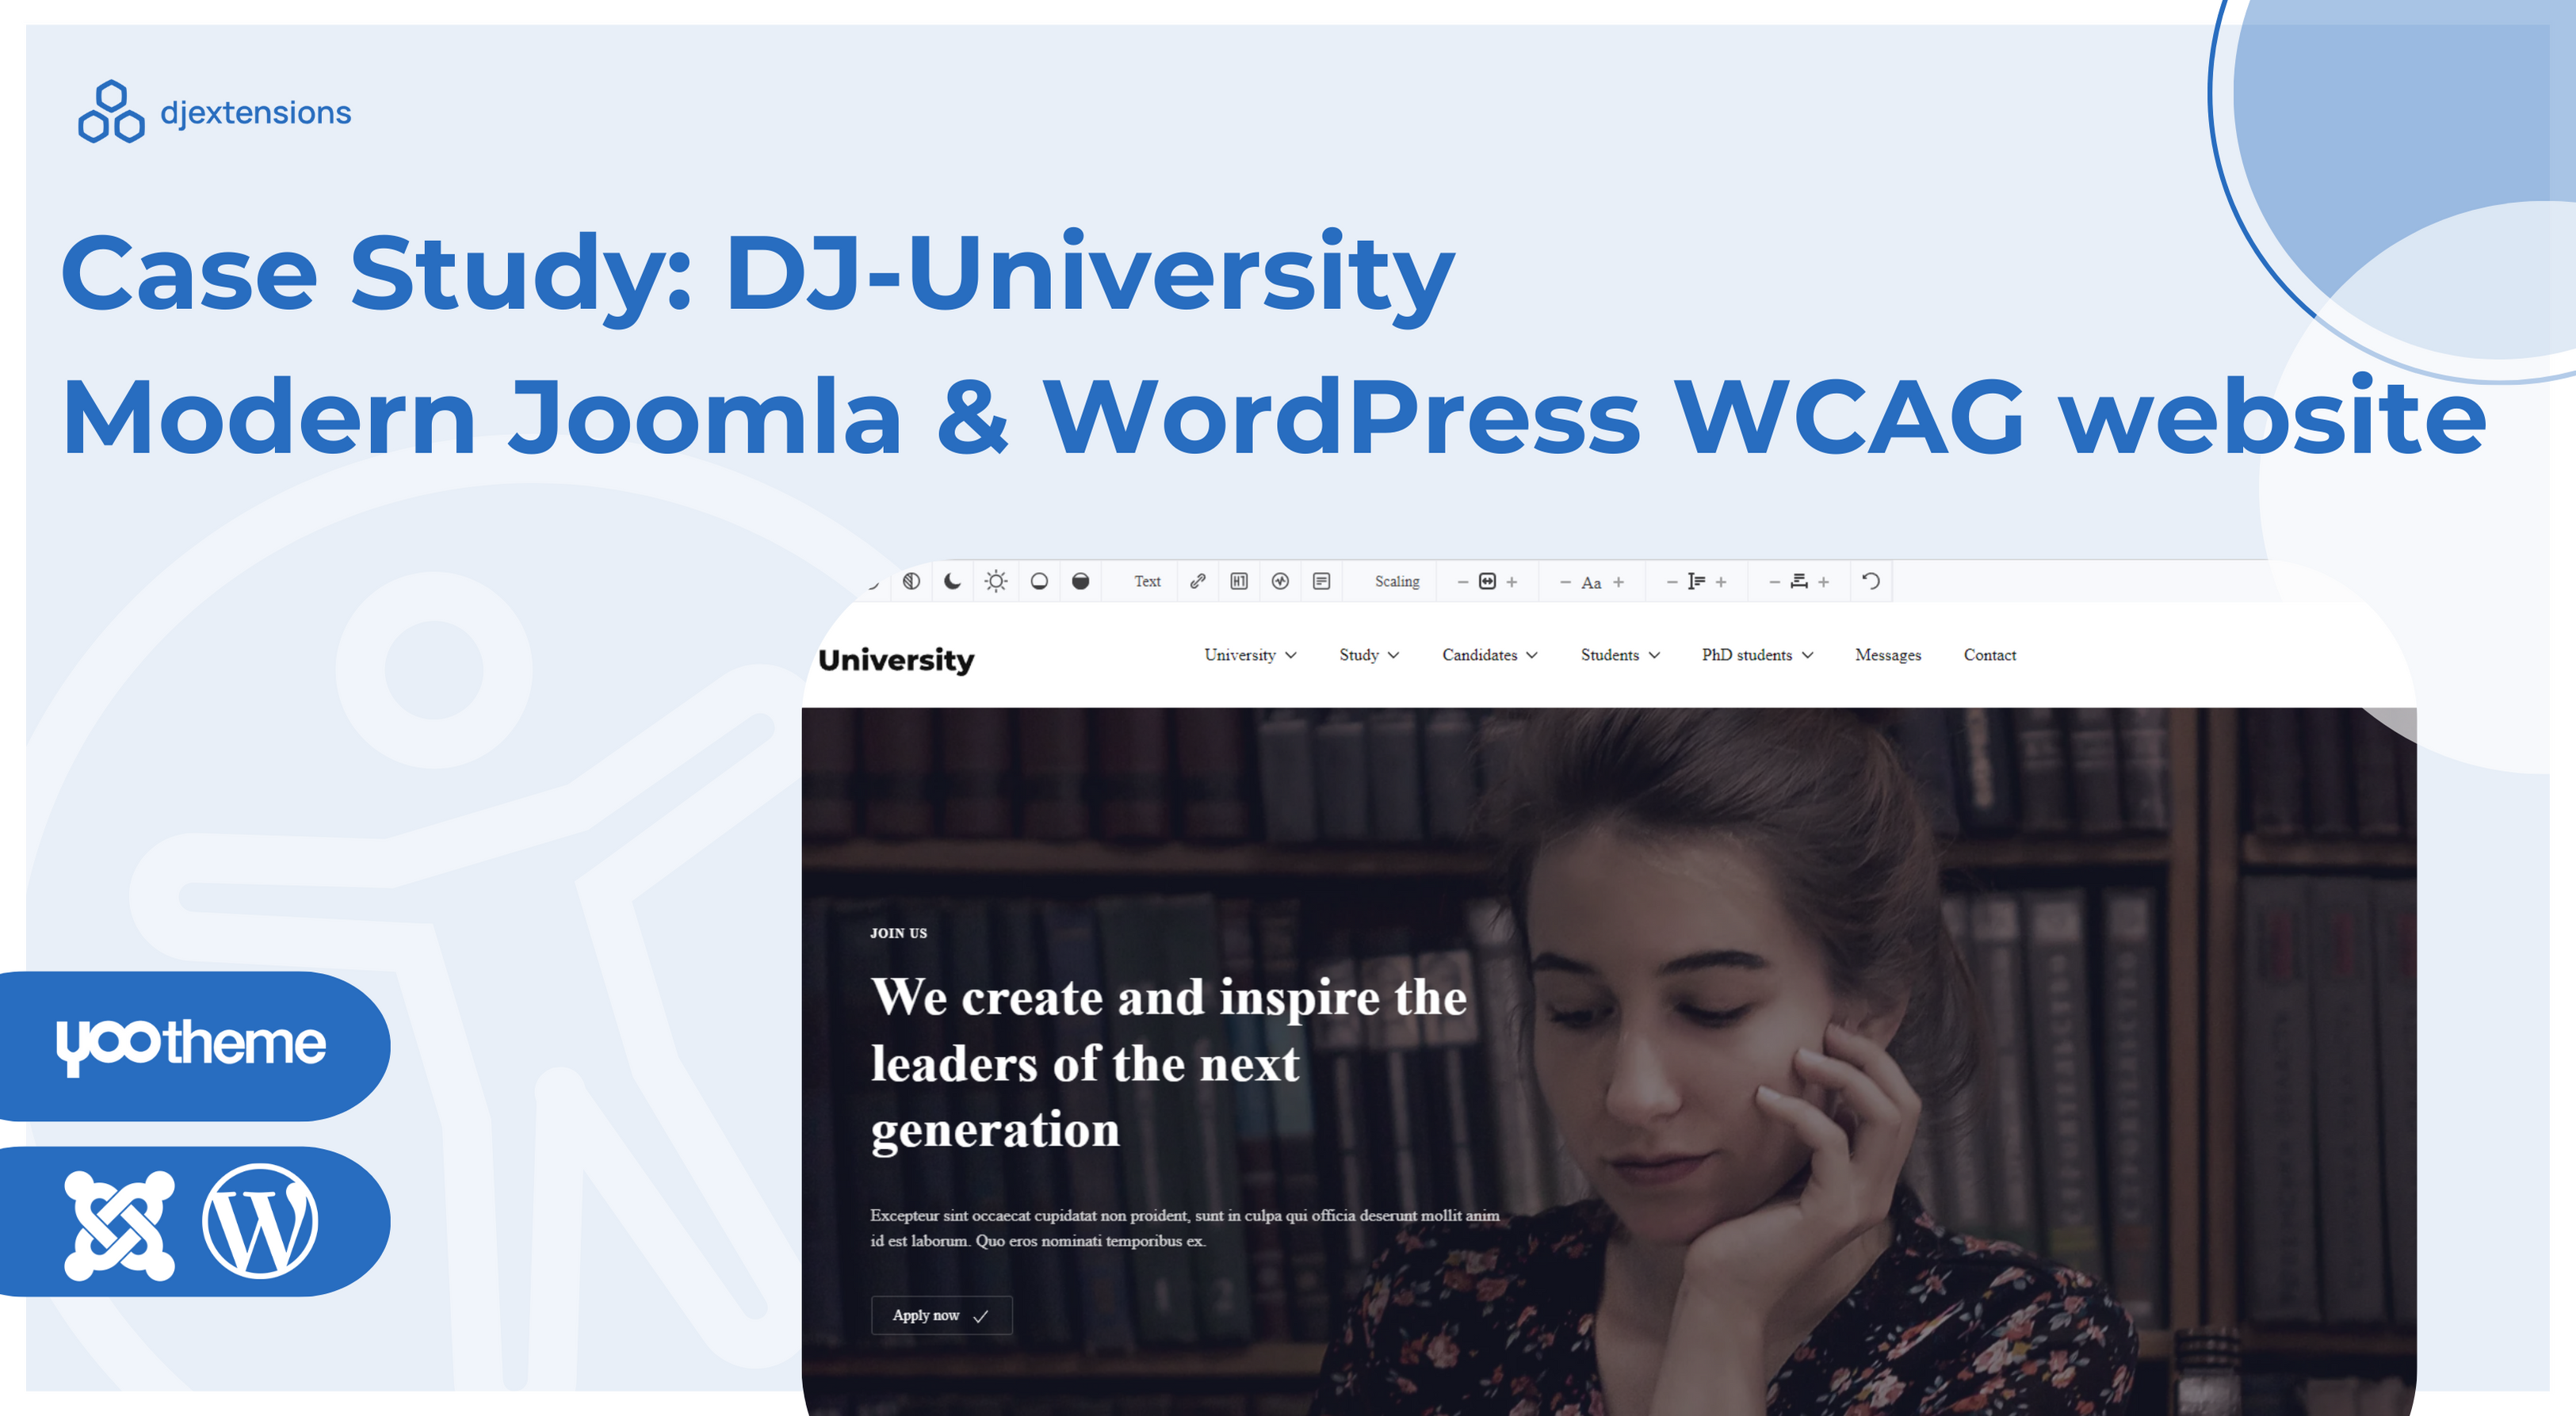 DJ-University - a modern WCAG tool for an educational institution web page - discover its advanced features